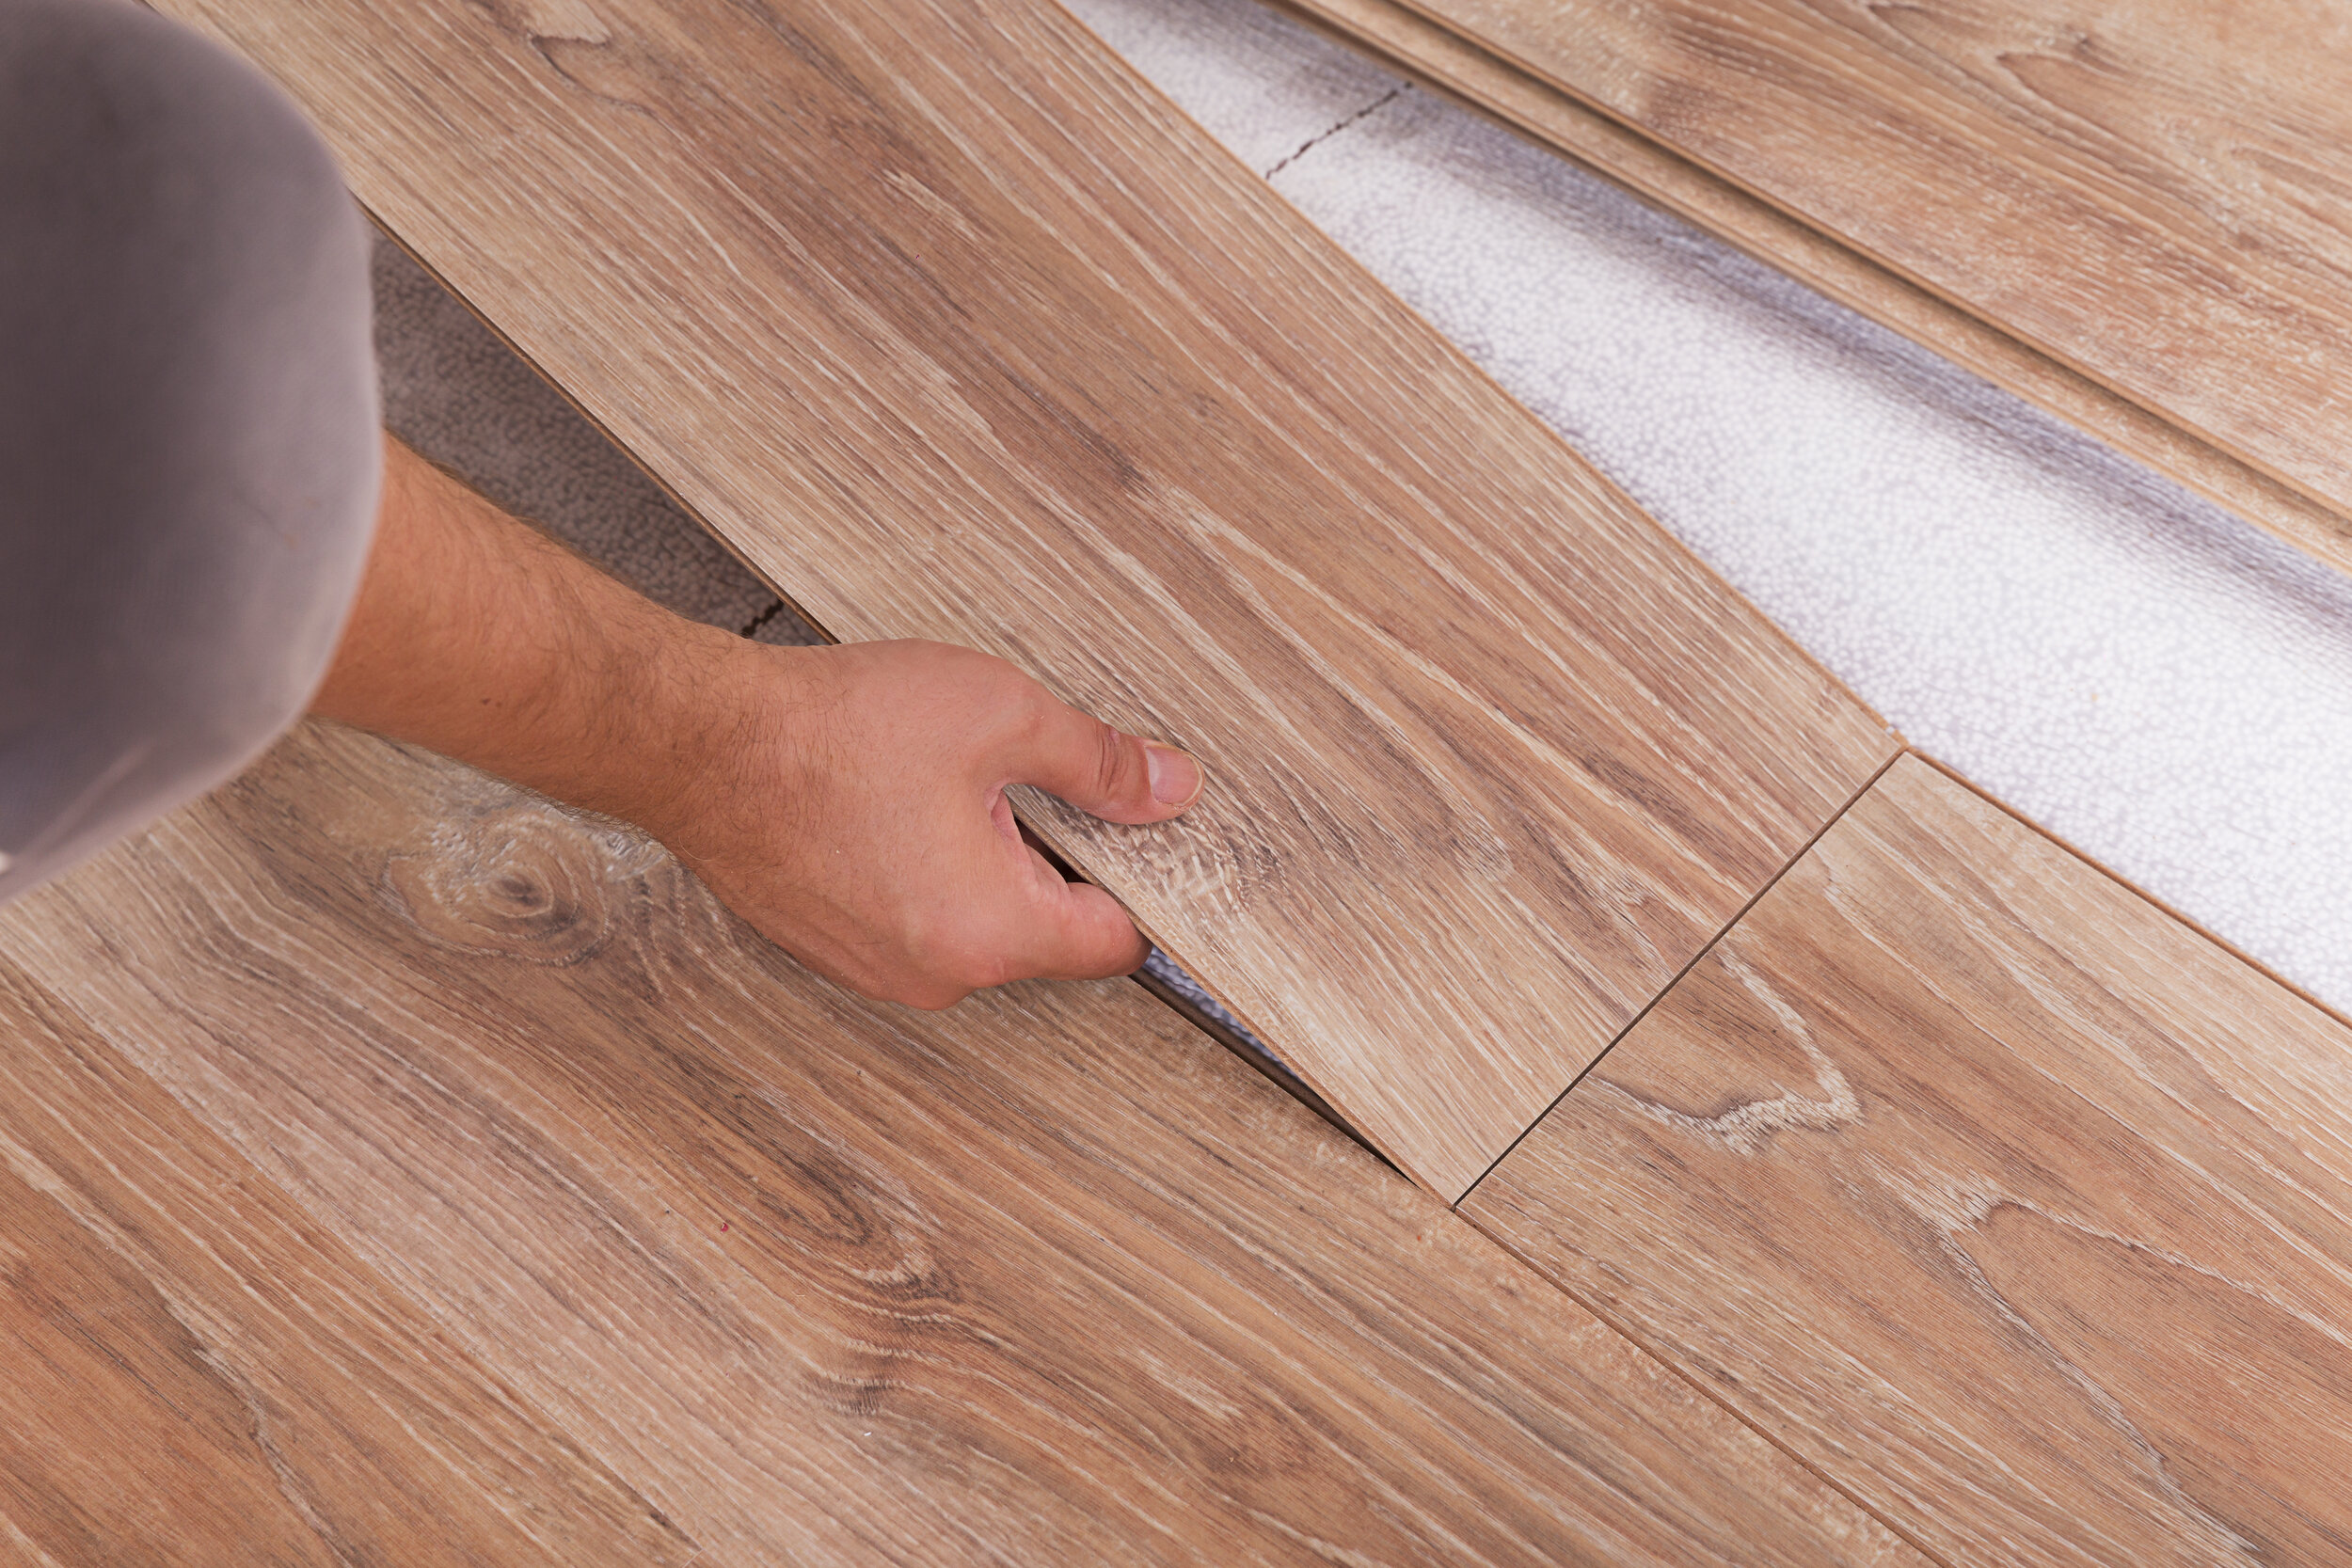 Waterproof Laminate Flooring, How To Care For Waterproof Laminate Flooring